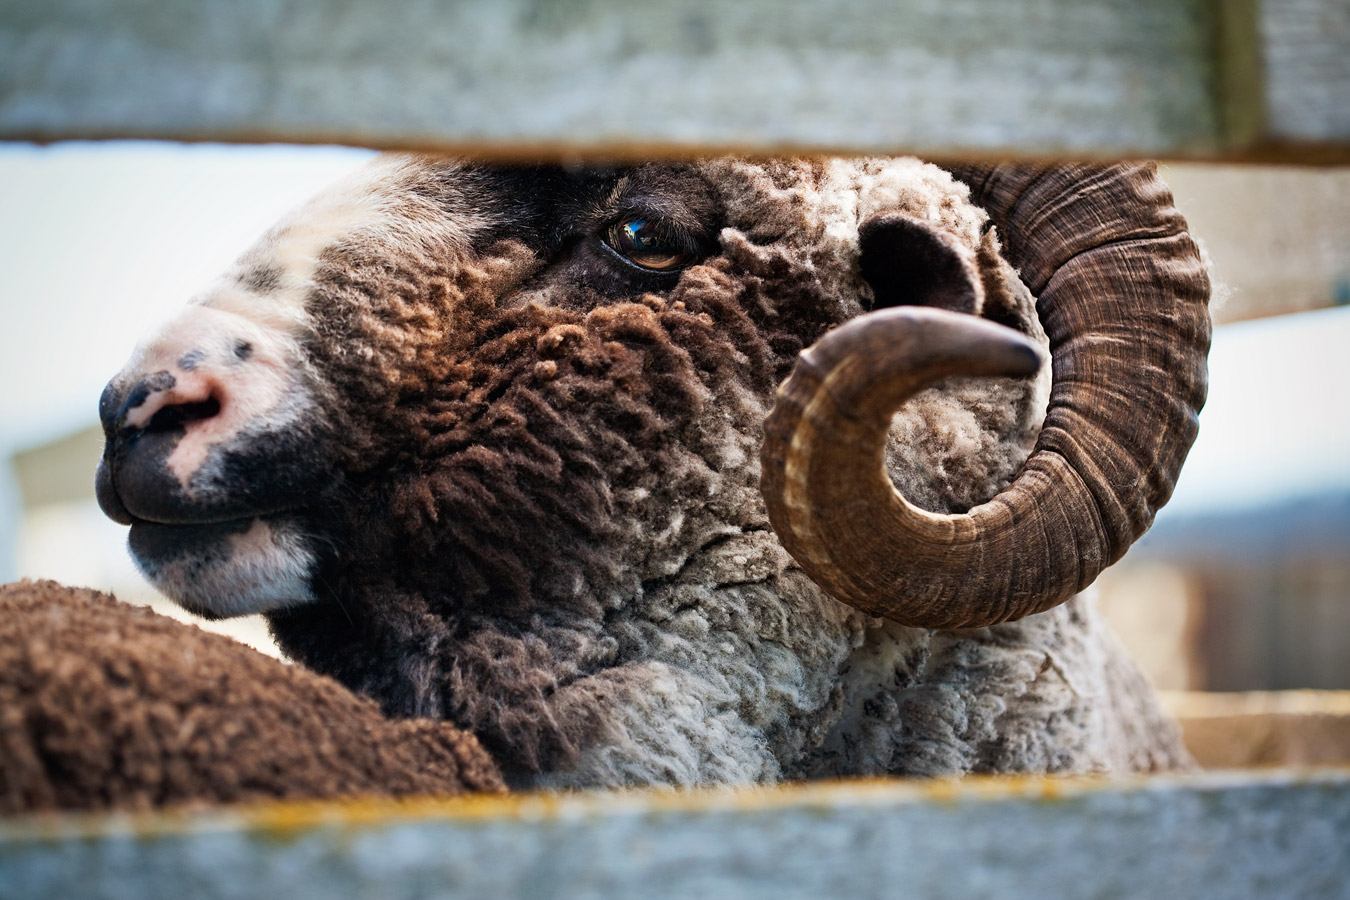 New Zealand merino story shot by Sharon Blance, Melbourne editorial and commercial photographer